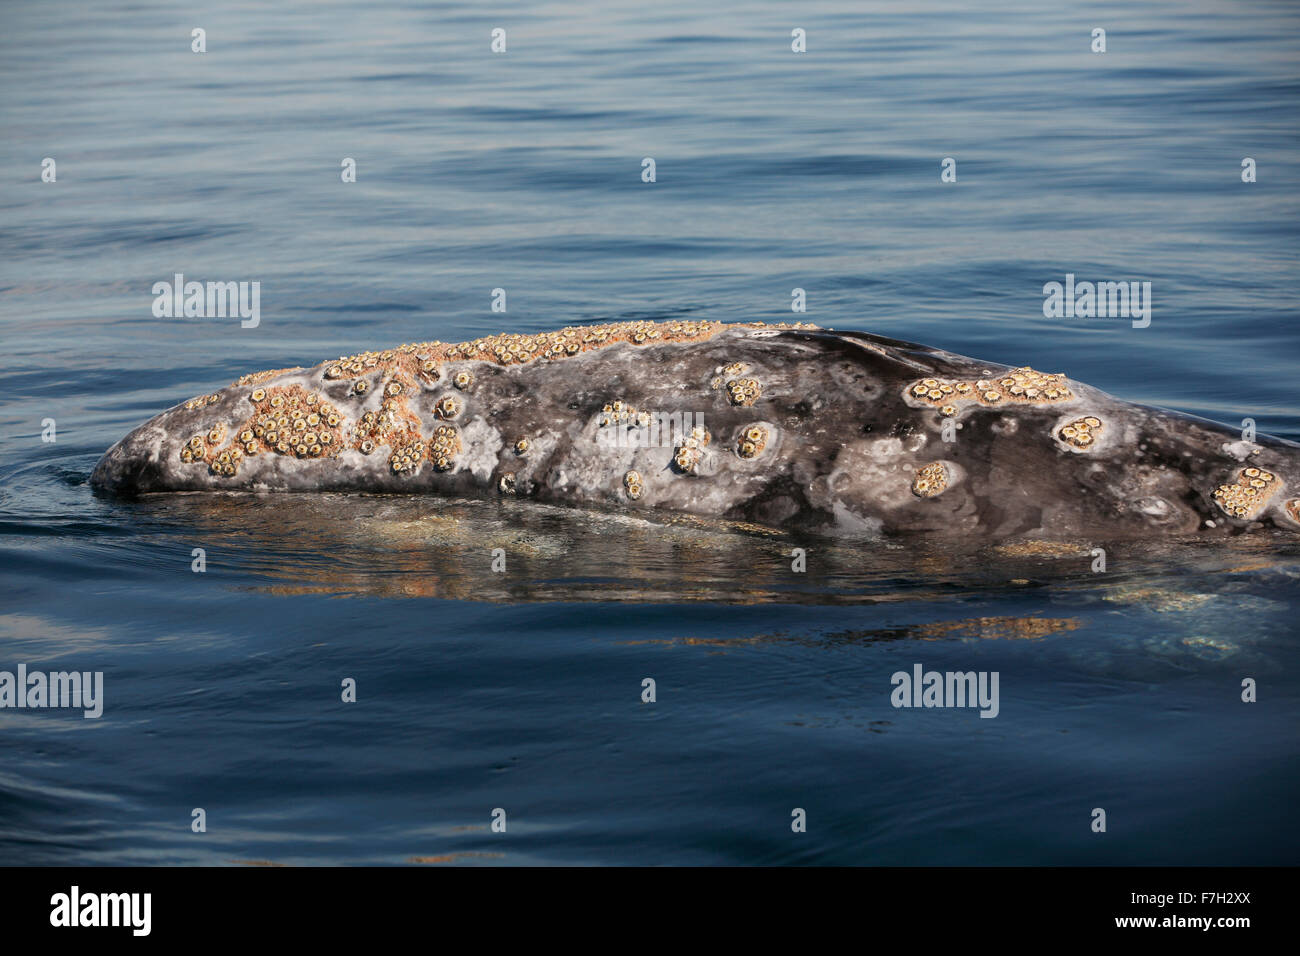 pr5013-D. Gray Whale (Eschrichtius robustus). Head is covered with barnacles (Cryptolepas rhachianecti) and cyamid whale lice. Stock Photo